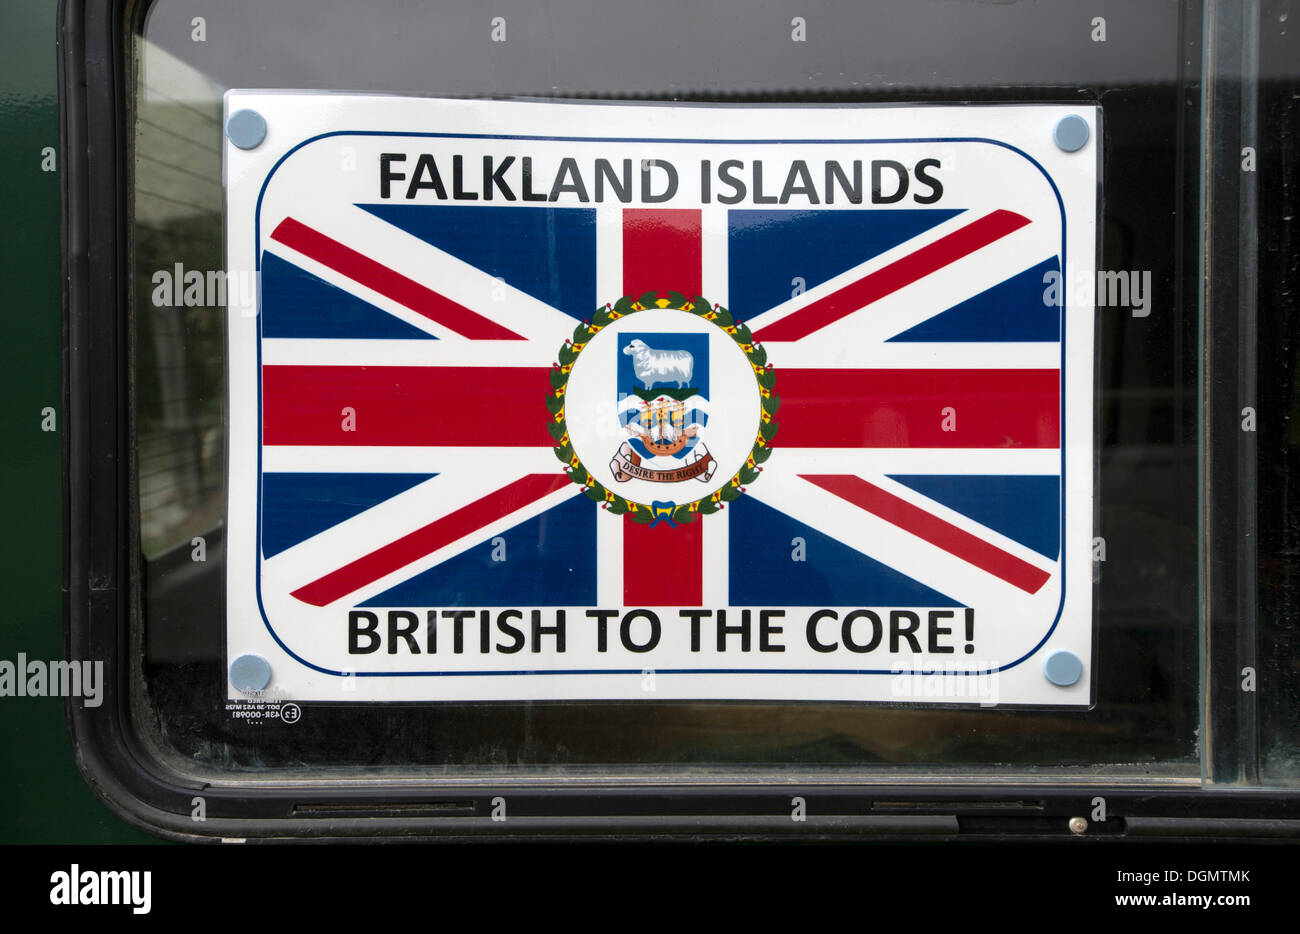 Sign 'Falkland Islands - British to the Core' with a coat of arms and the flag of the Falkland Islands, displayed in a car Stock Photo